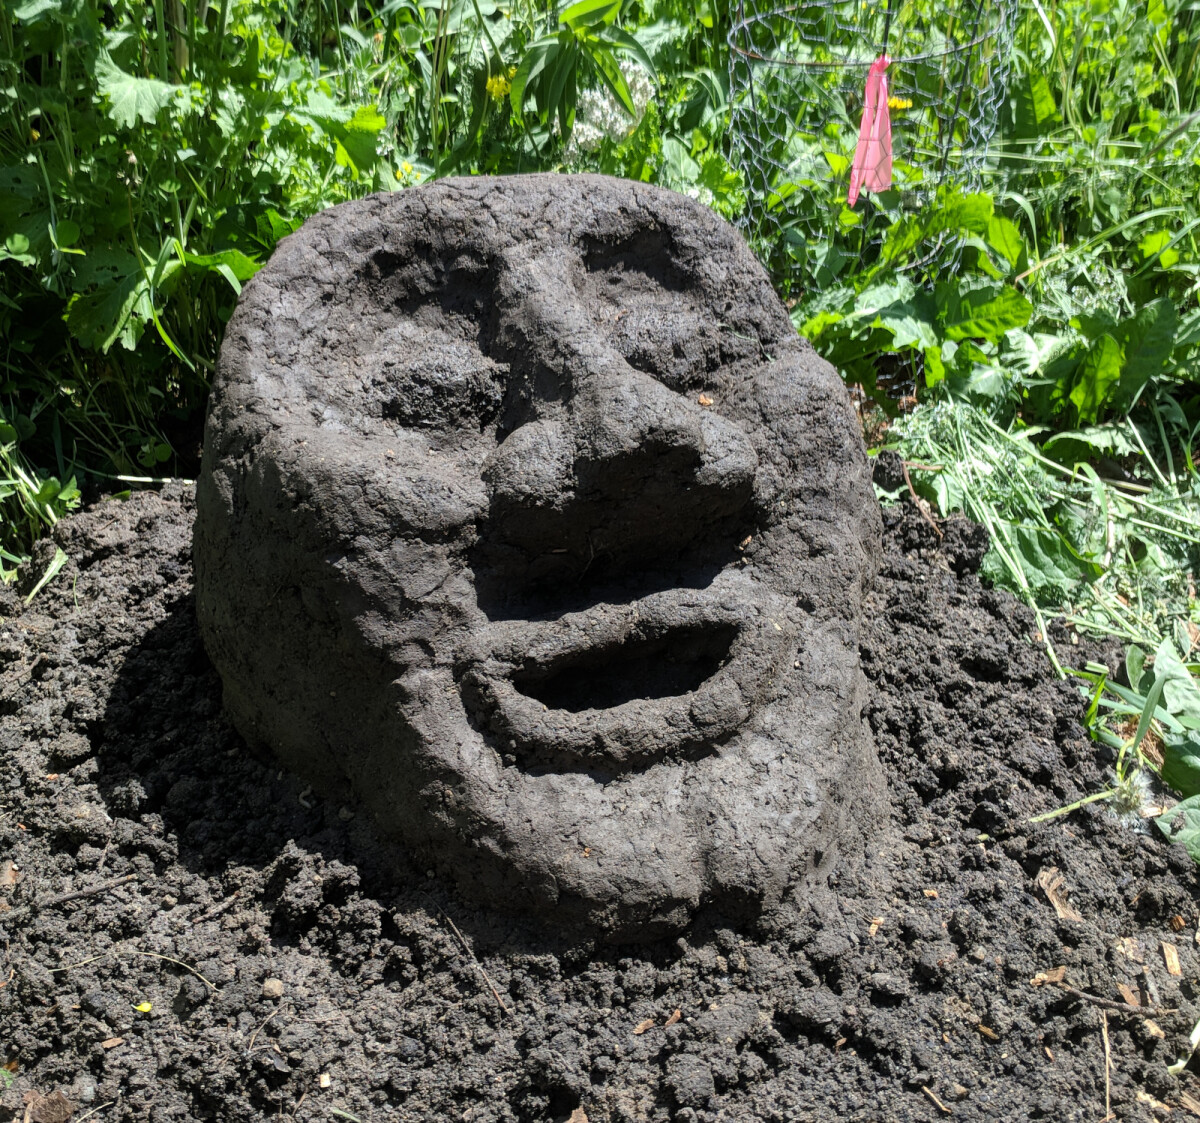 Finished mud sculpture